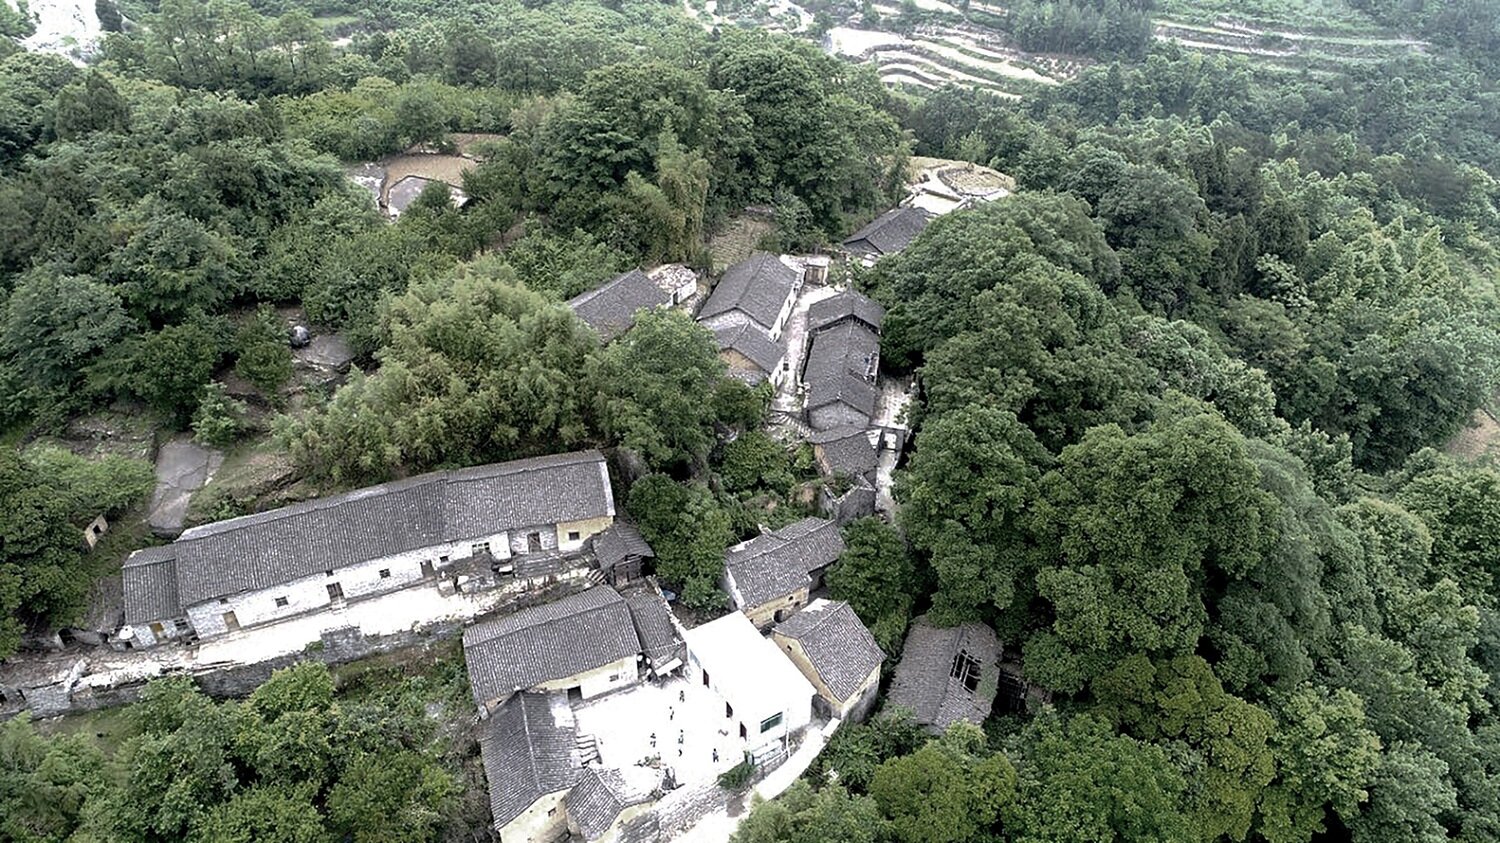 Bird's-eye view of lahao stone house in Fenghuang ancient city, Hunan Province